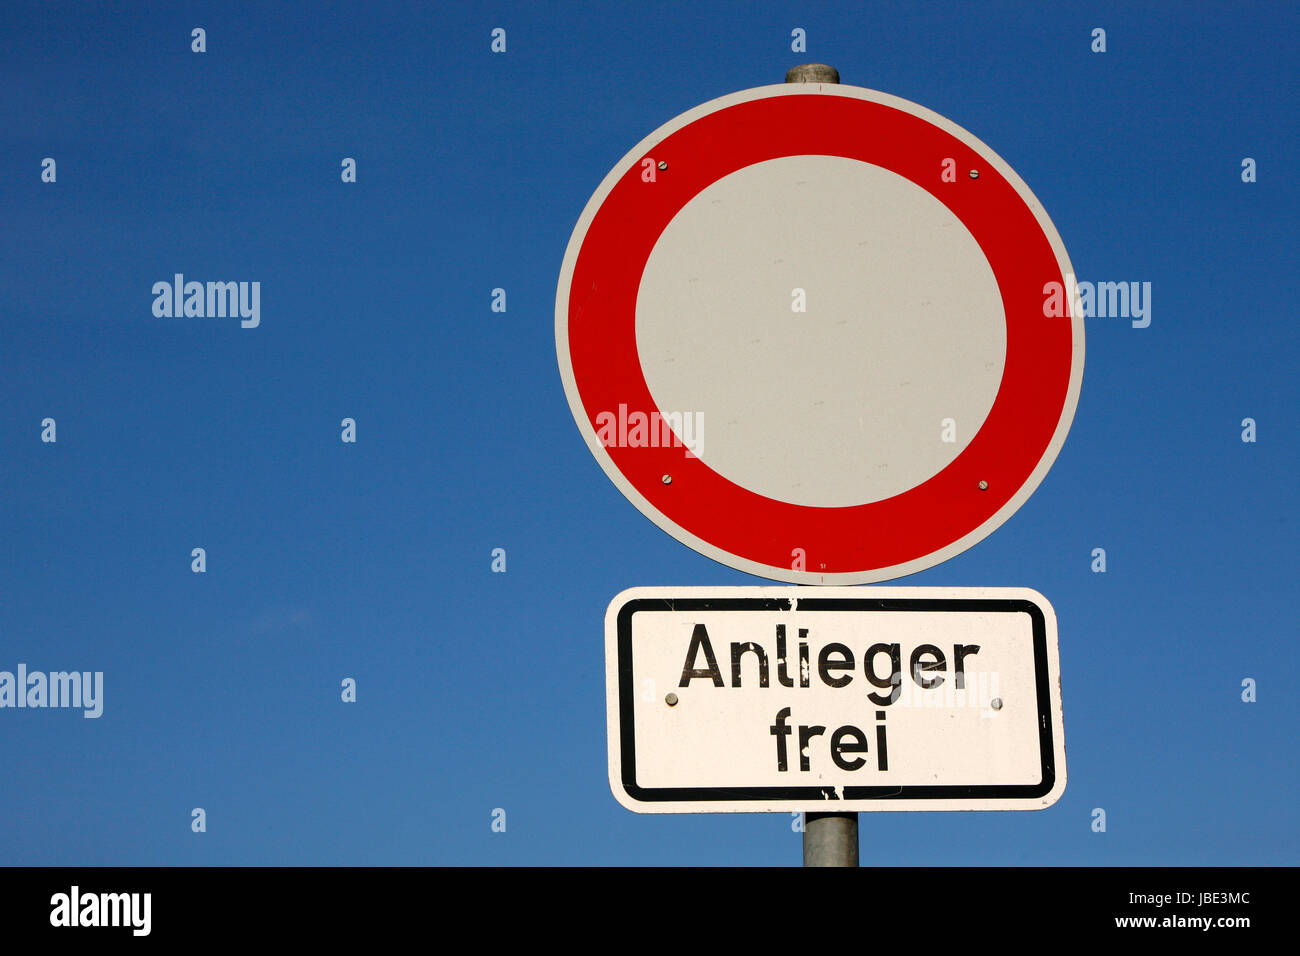 Anlieger frei Stock Photo